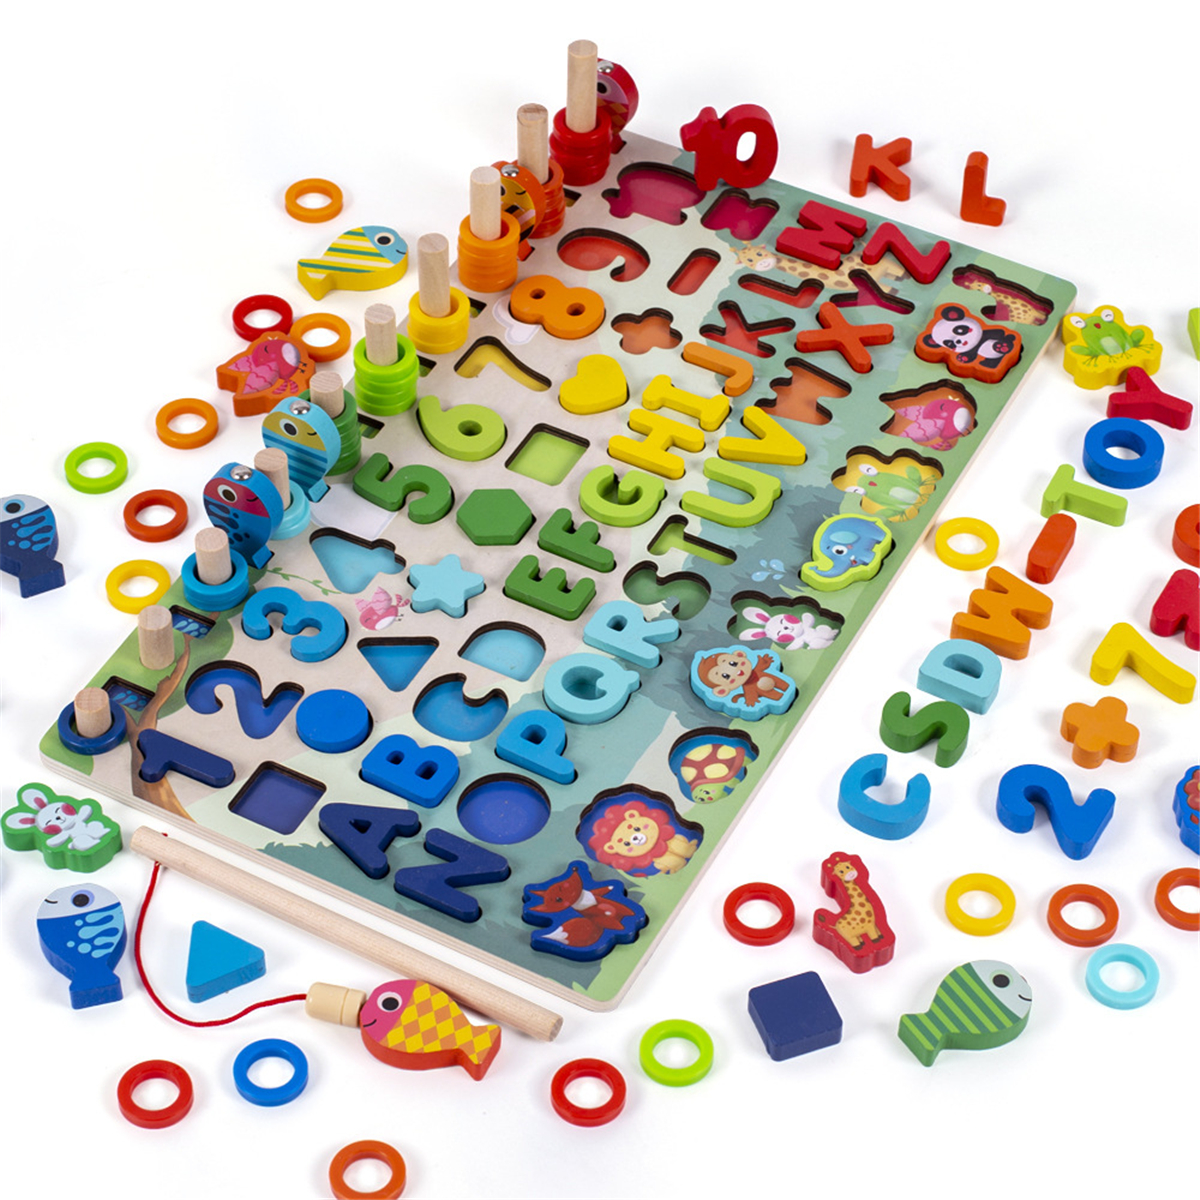 Details about  / Montessori Stamps Game Set Math Number Kids Early Learning Wooden Toy